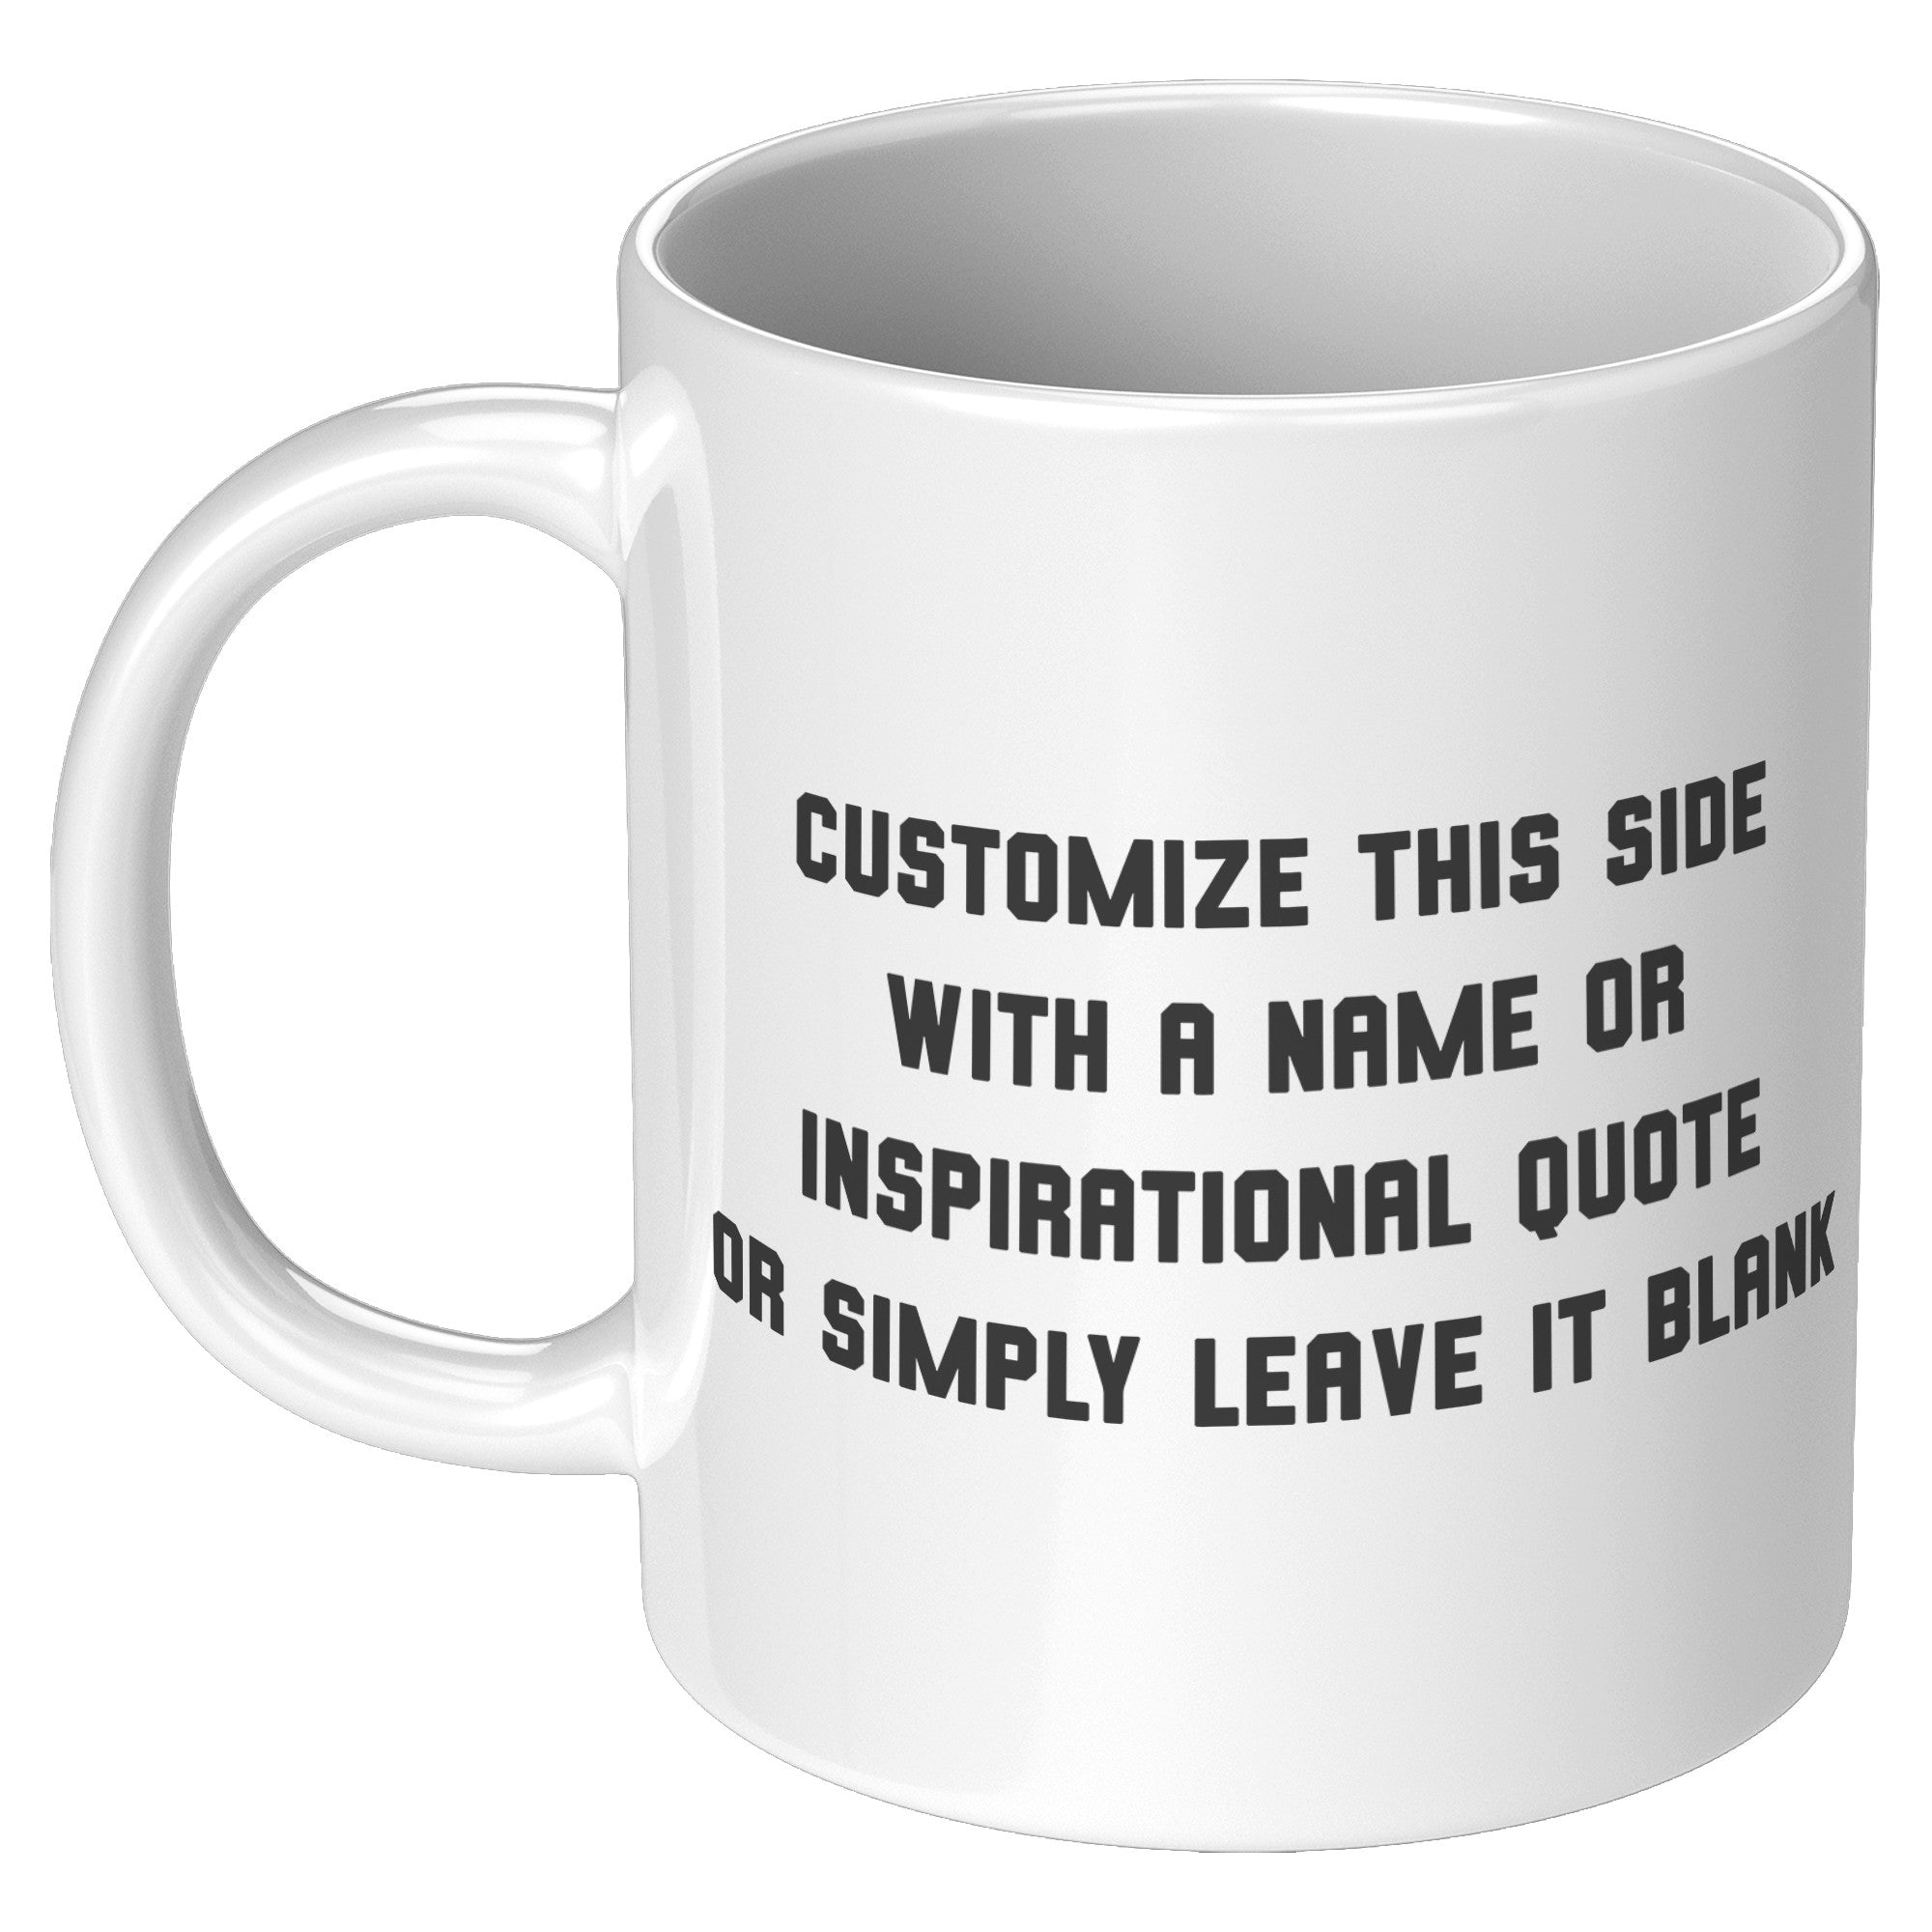 "Female Runner Coffee Mug - Inspirational Running Quotes Cup - Perfect Gift for Women Runners - Motivational Marathoner's Morning Brew" - F